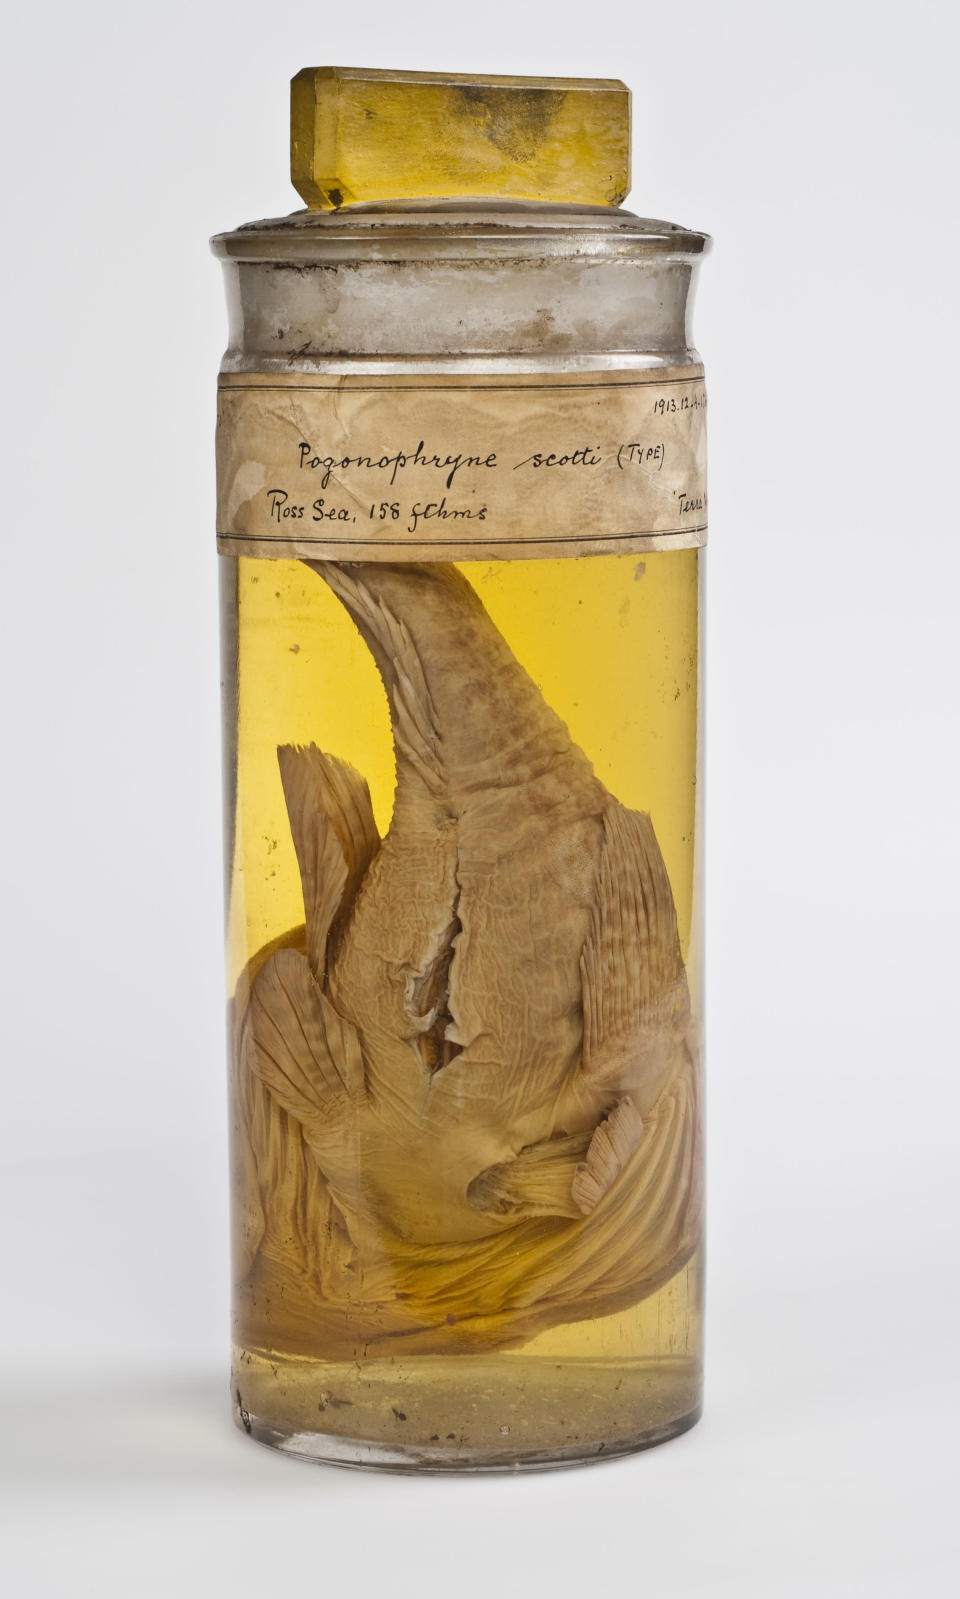 The fish Pogonophryne scotti was discovered by the Terra Nova expedition and named in honour of Scott. Pogonophryne scotti is relatively common in Antarctic waters and occurs at depths down to 1,000m. ©The Natural History Museum.